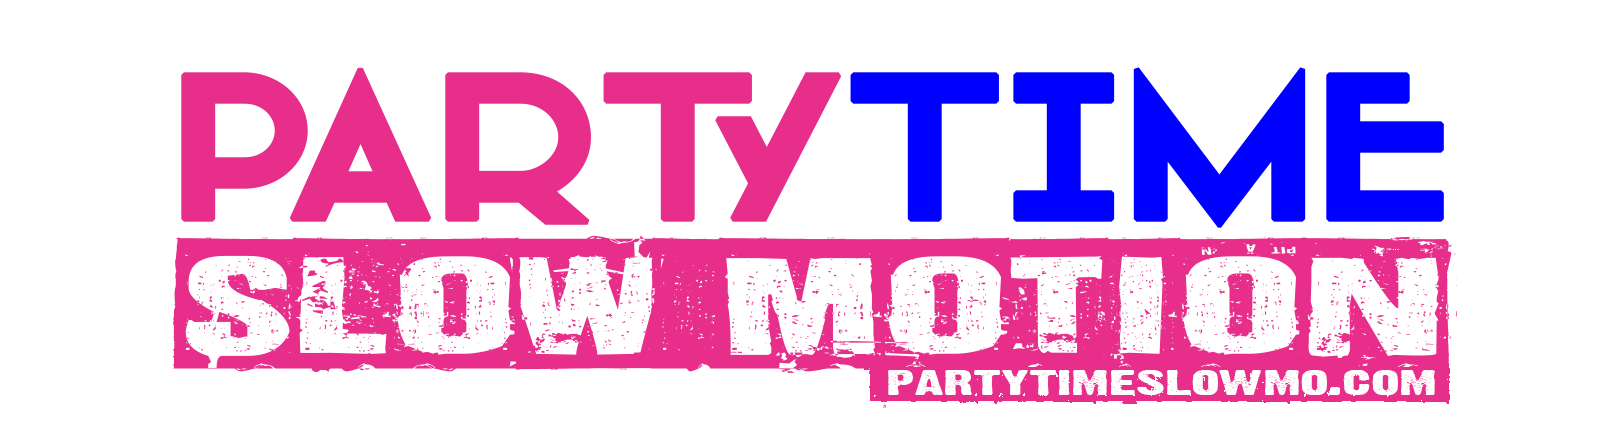 Party Time Slow Motion Logo